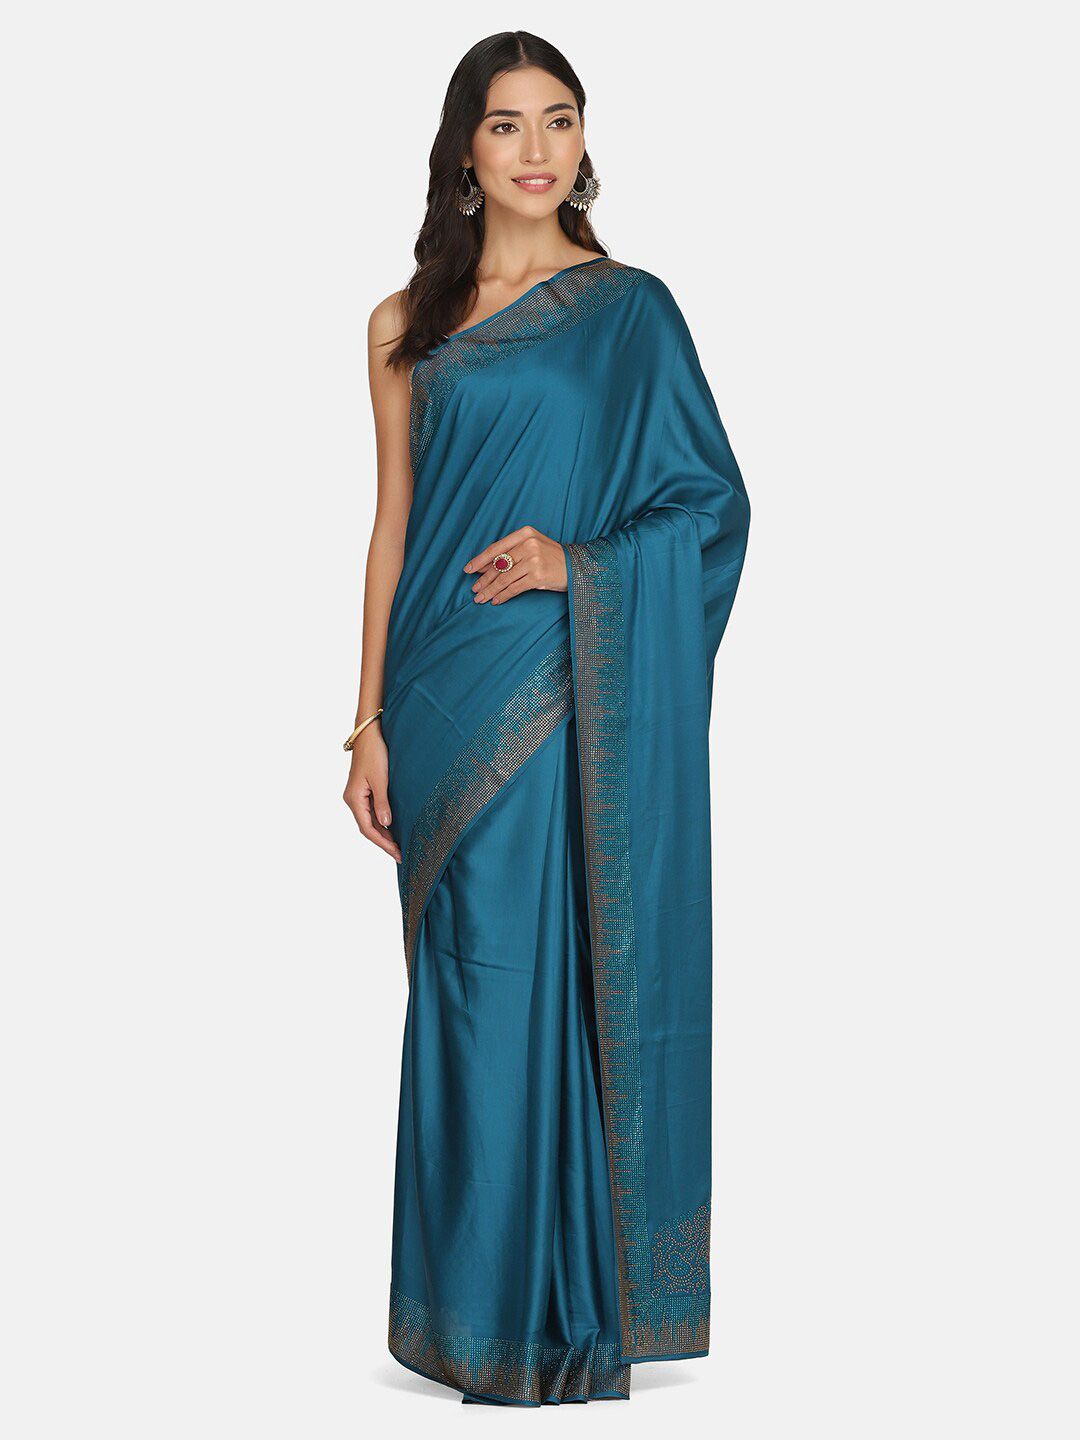 BOMBAY SELECTIONS Blue & Silver-Toned Embellished Satin Saree Price in India